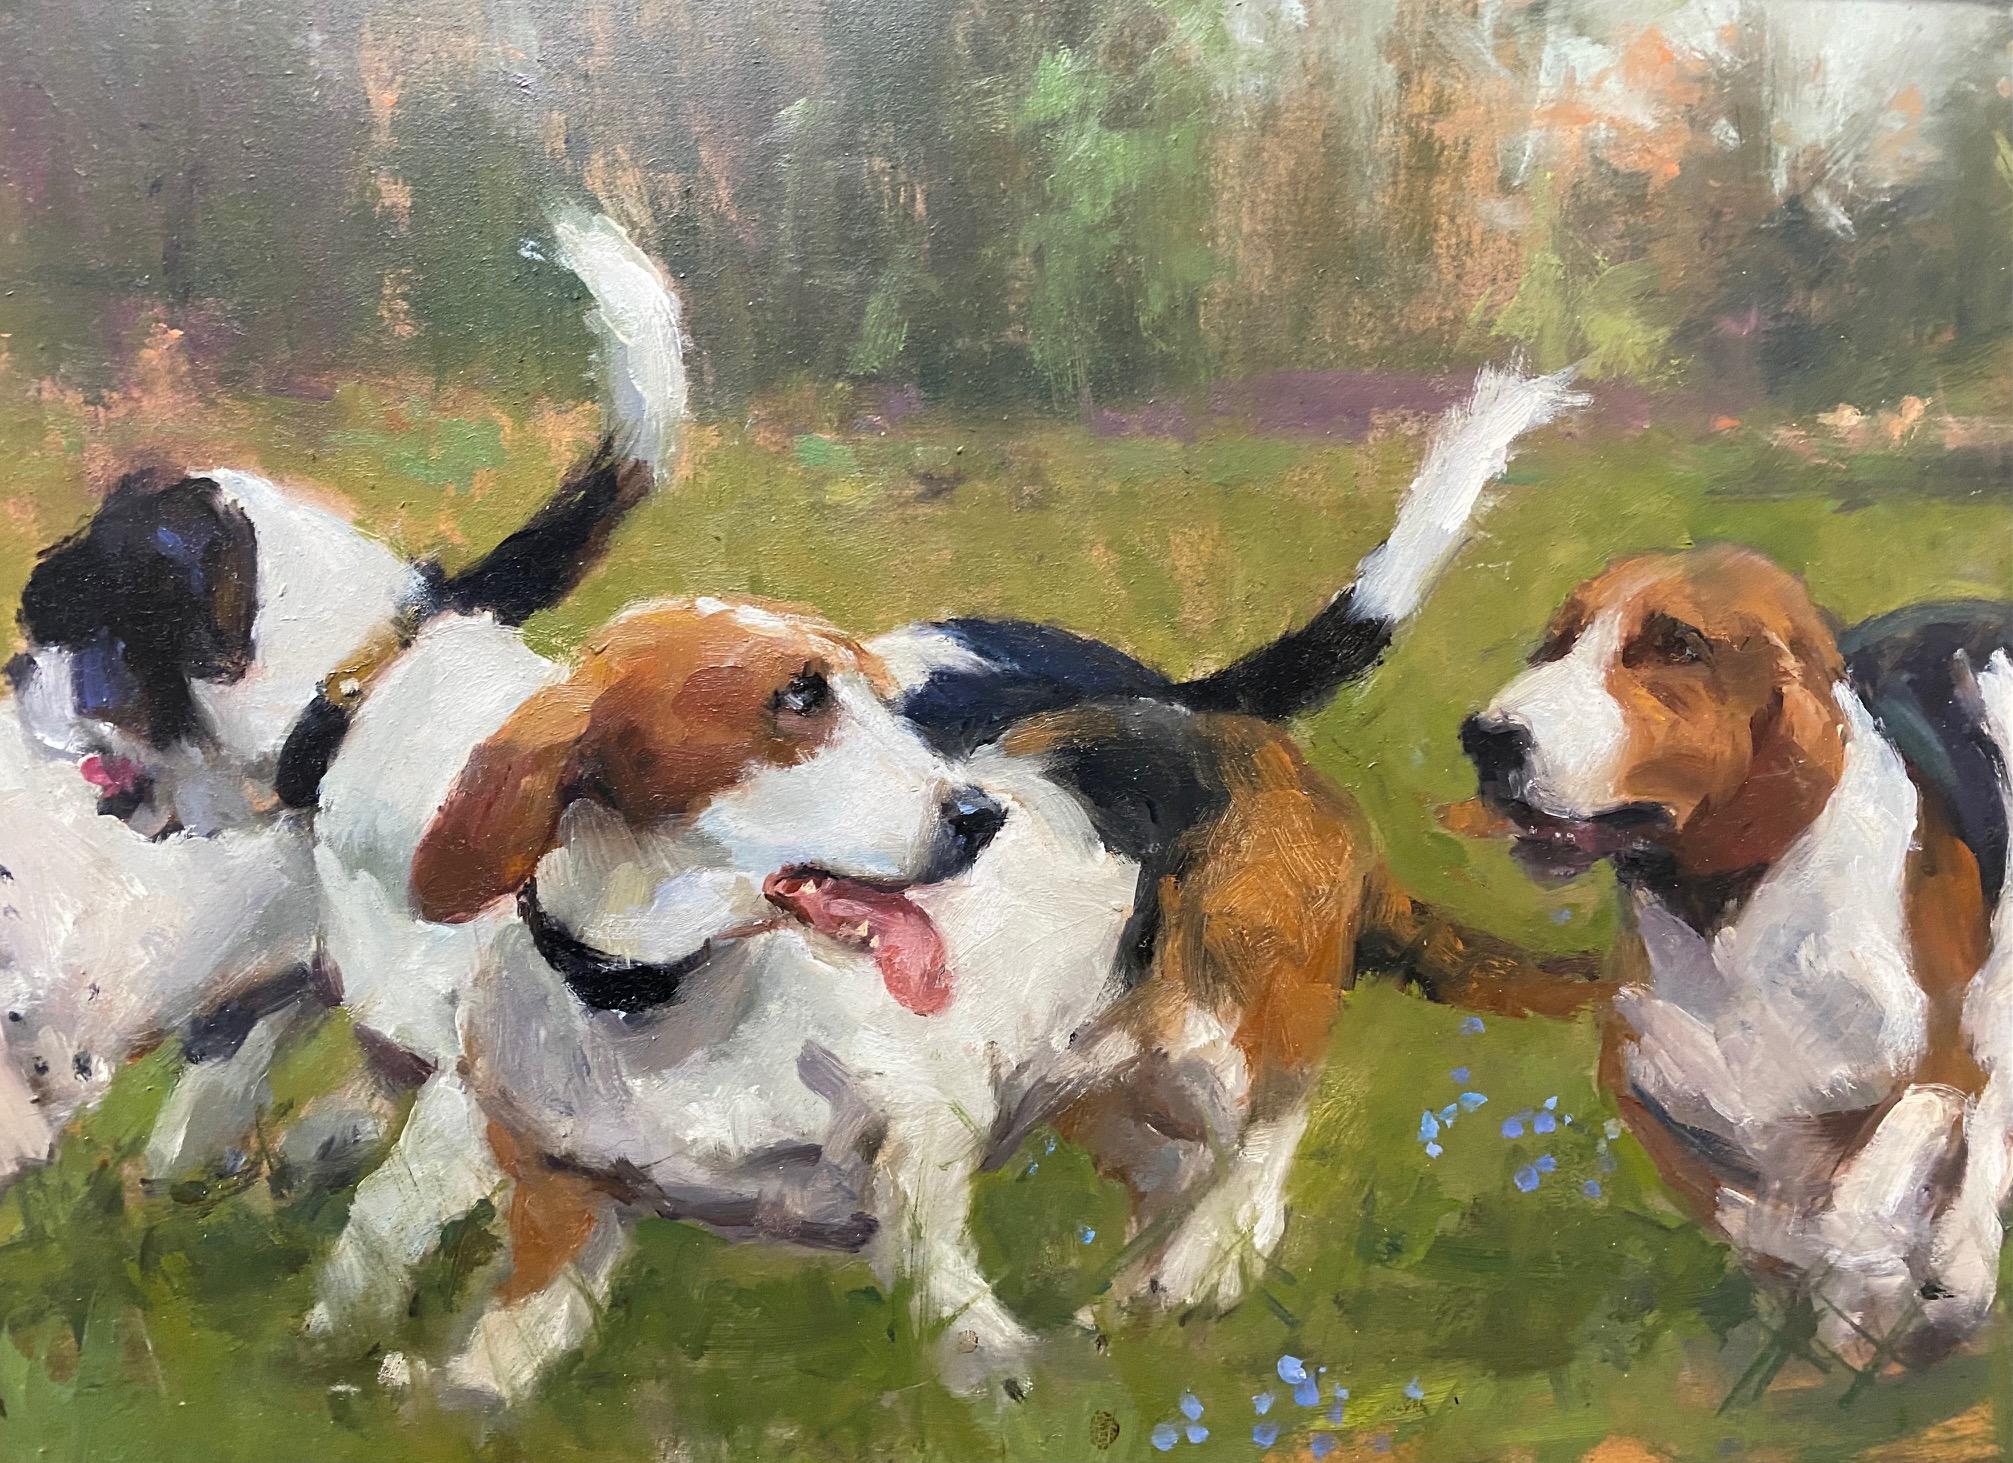 Who Let the Dogs Out?, original 10x30 dog portrait and landscape - Impressionist Painting by Joseph Sundwall